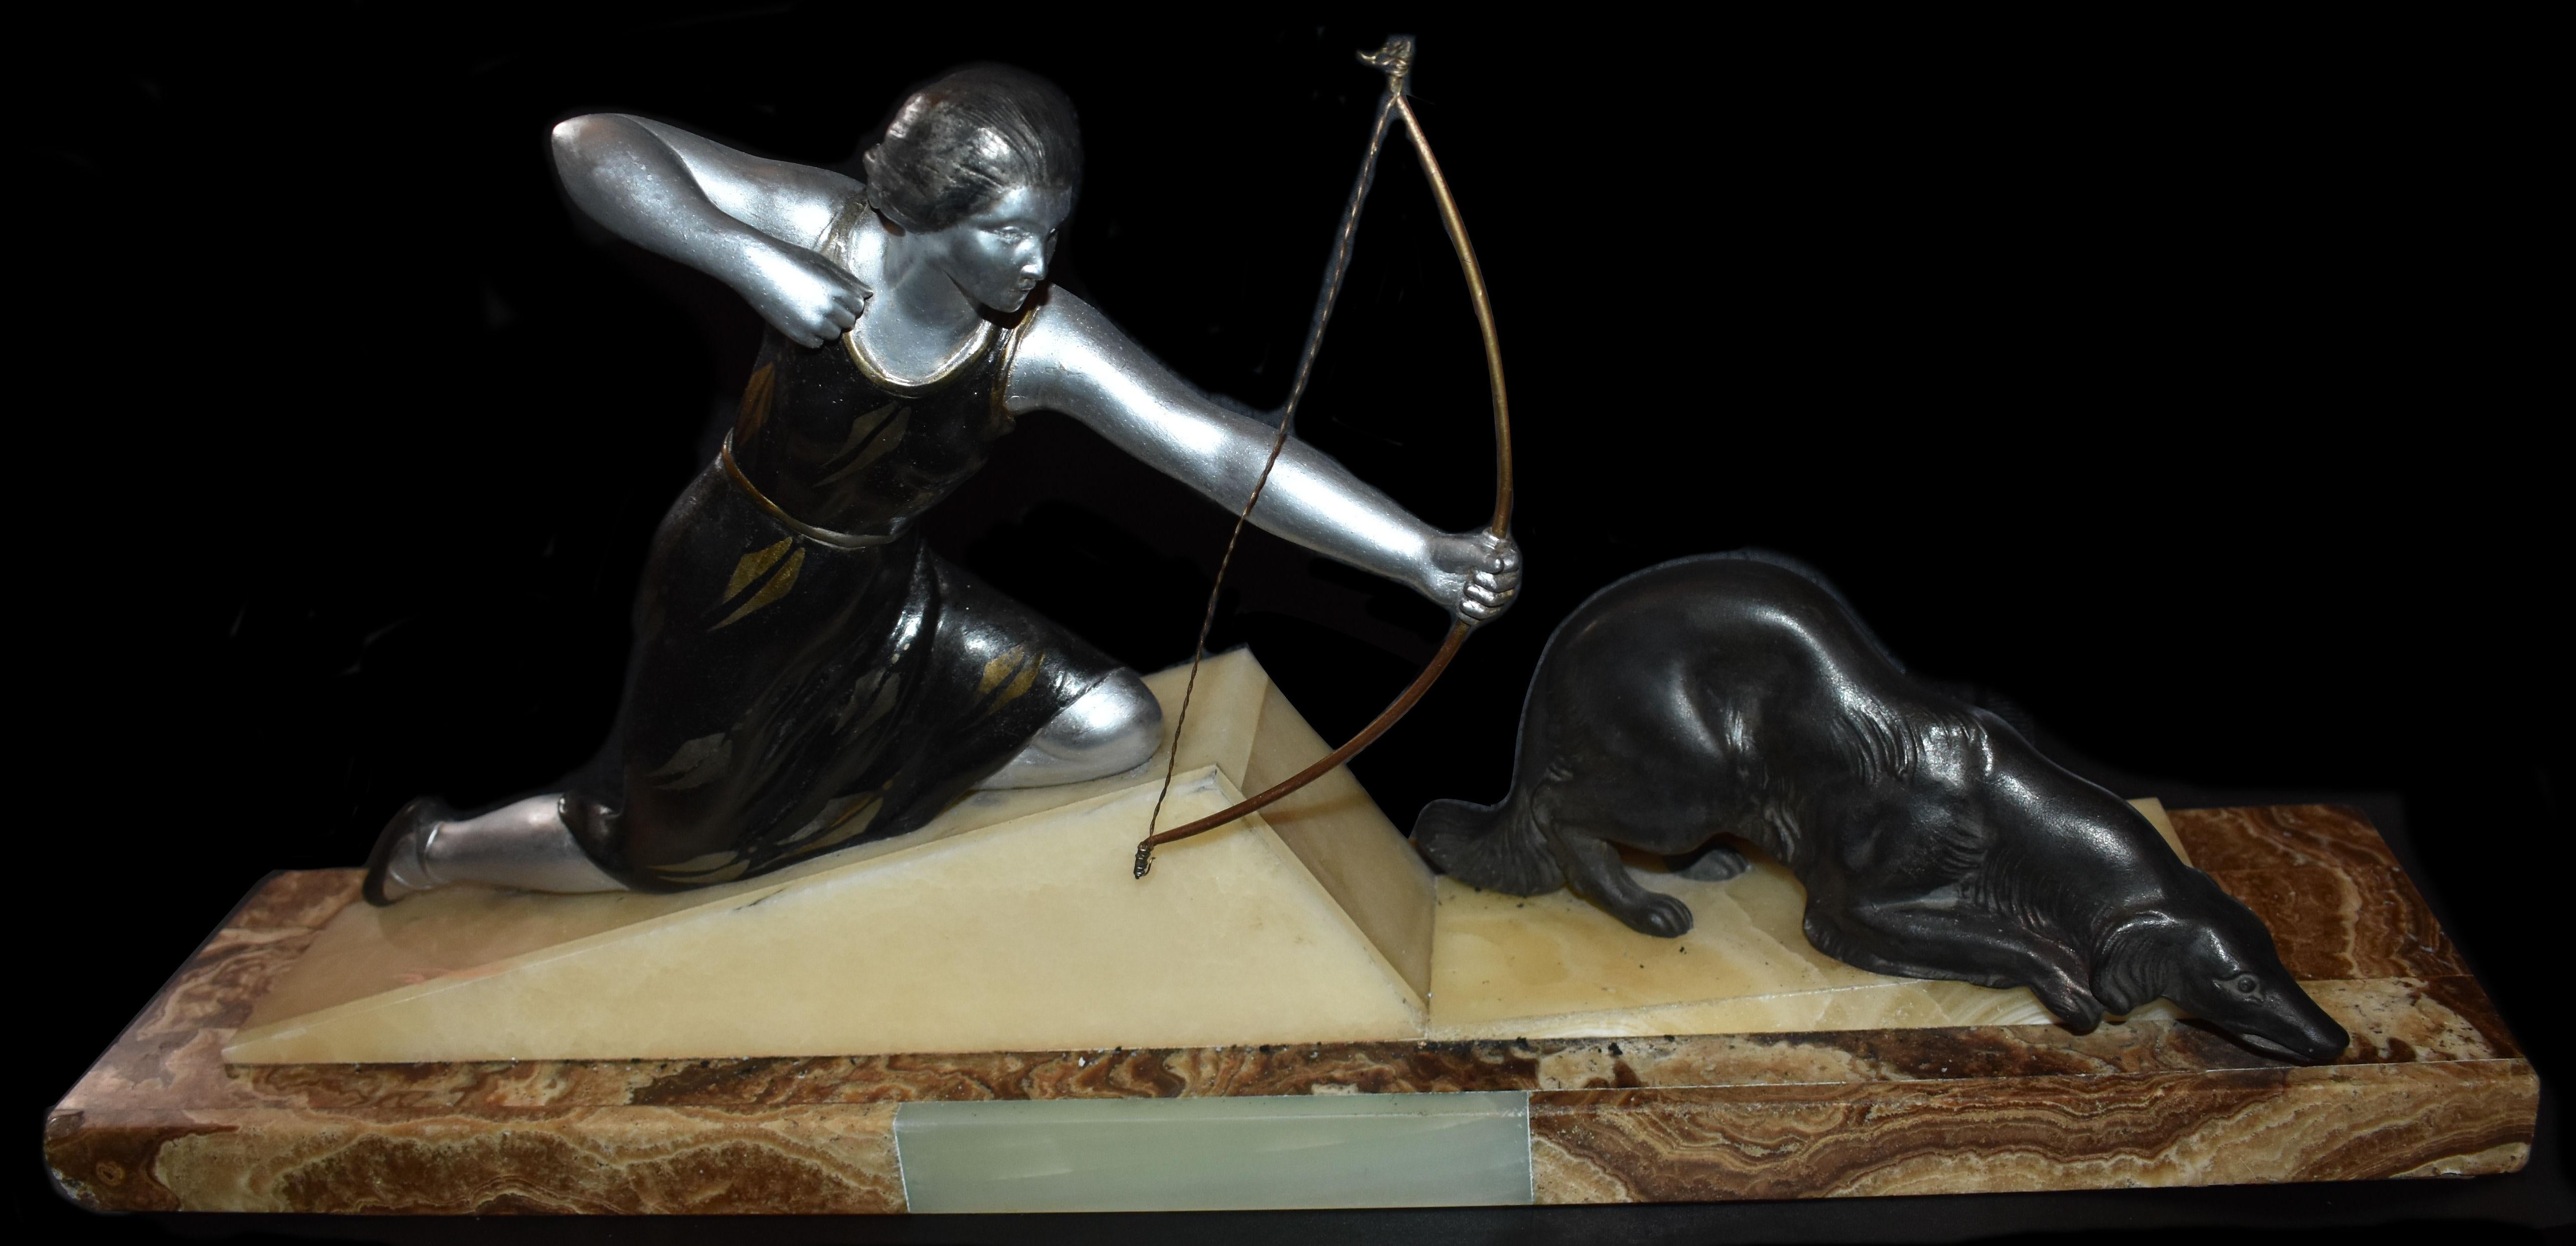  Art Deco Figural Group on Marble, c1930s In Good Condition For Sale In Devon, England